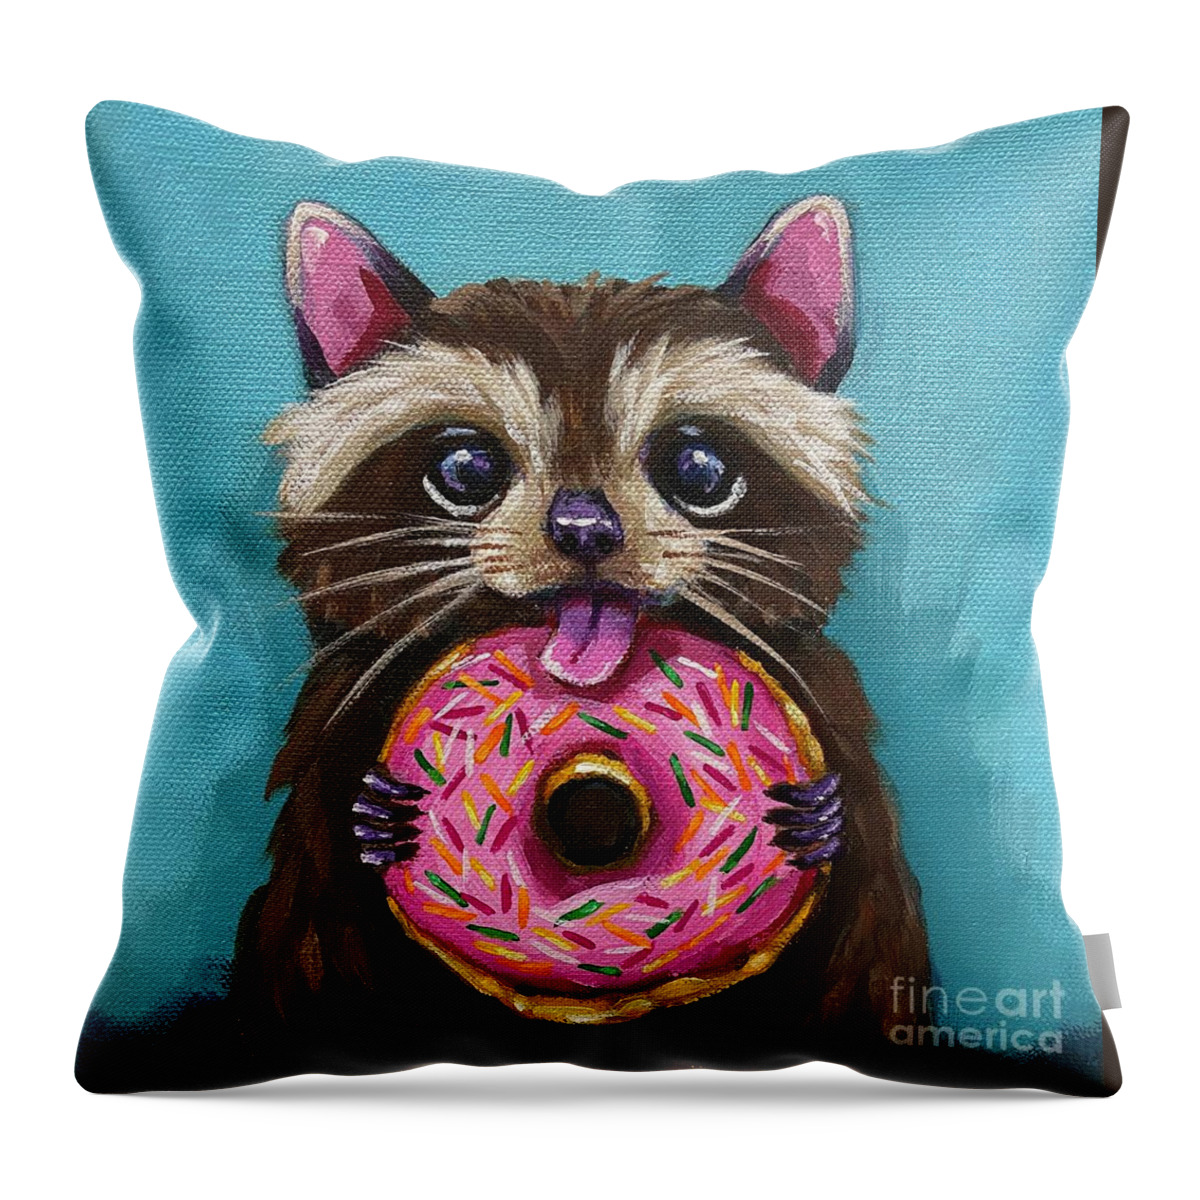 Raccoon Throw Pillow featuring the painting Raccoon Breakfast by Lucia Stewart